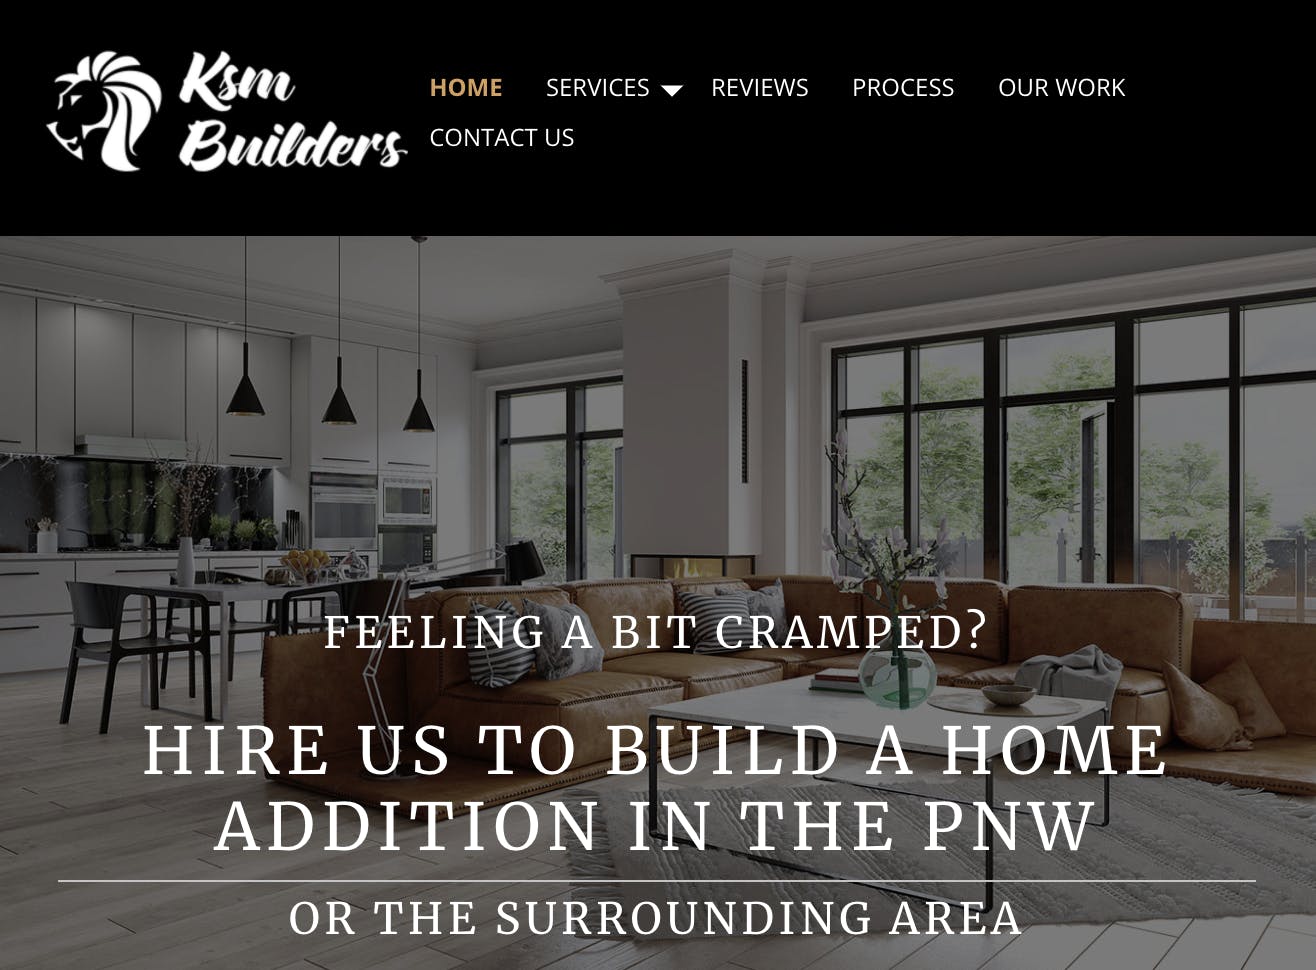 Custom website for KSM builders created by houzz pro